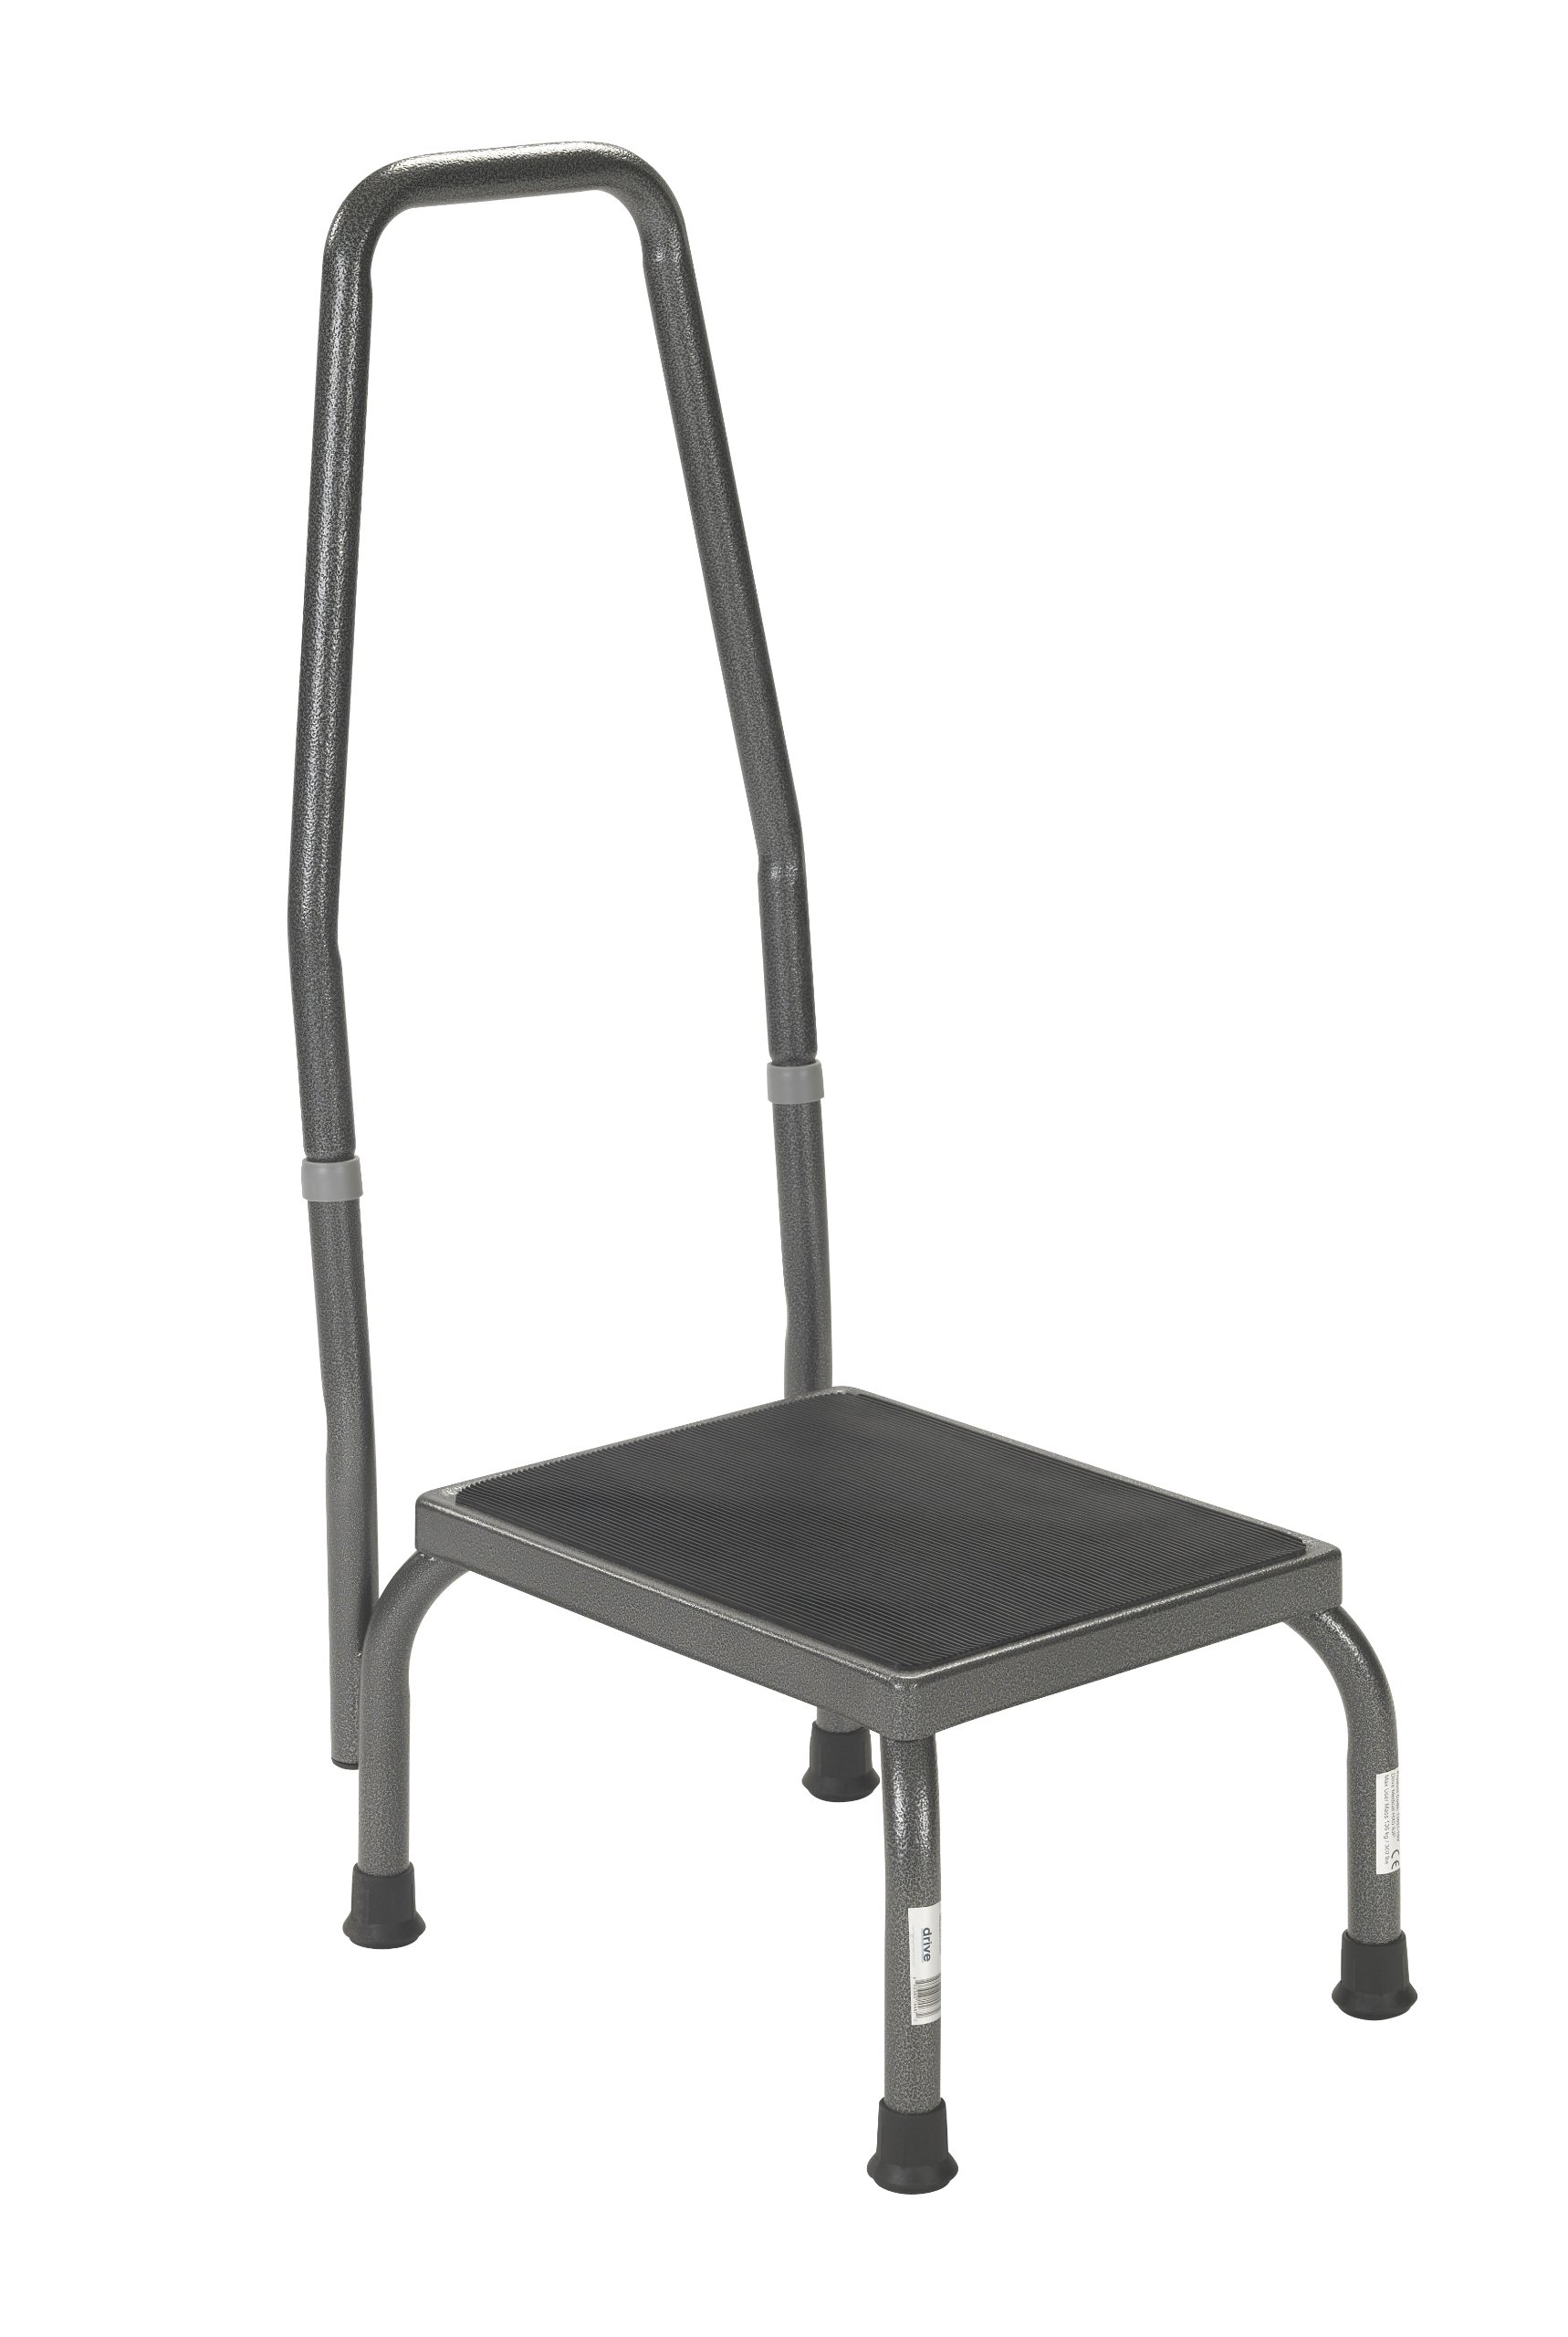 Drive Medical 13031-1SV Bariatric Step Stool with Handrail, Silver Vein